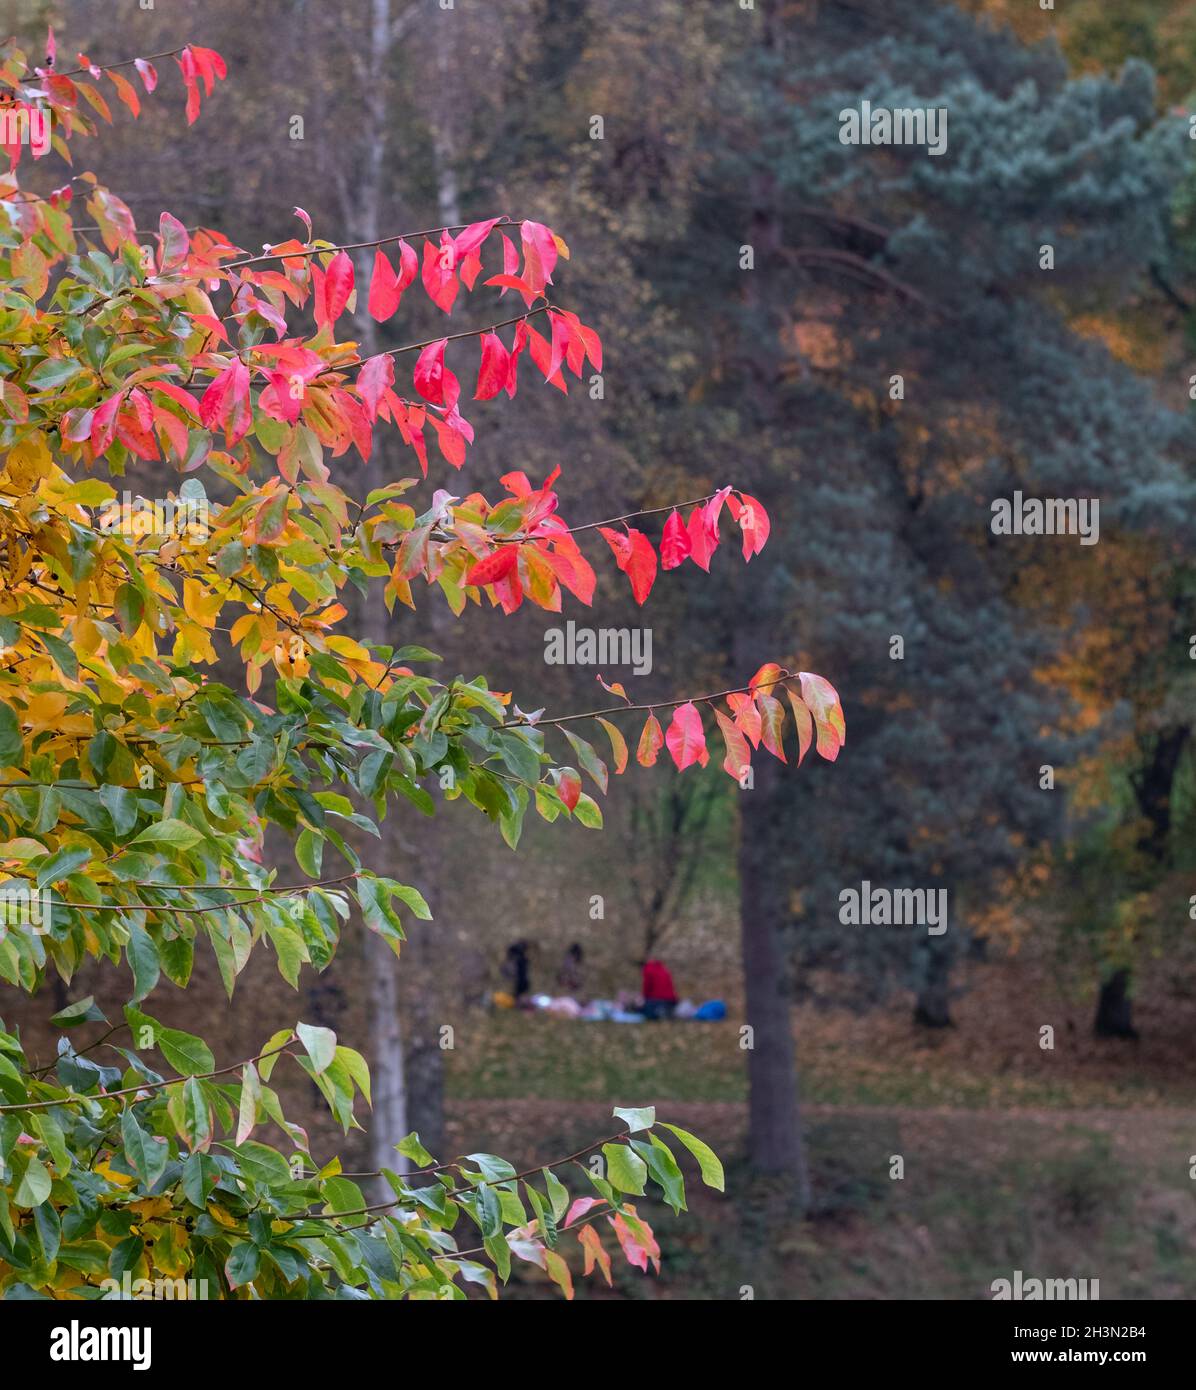 Variety of trees including acer, cherry and maple trees in a blaze of autumn colour, photographed at Winkworth Arboretum, Surrey, UK. Stock Photo